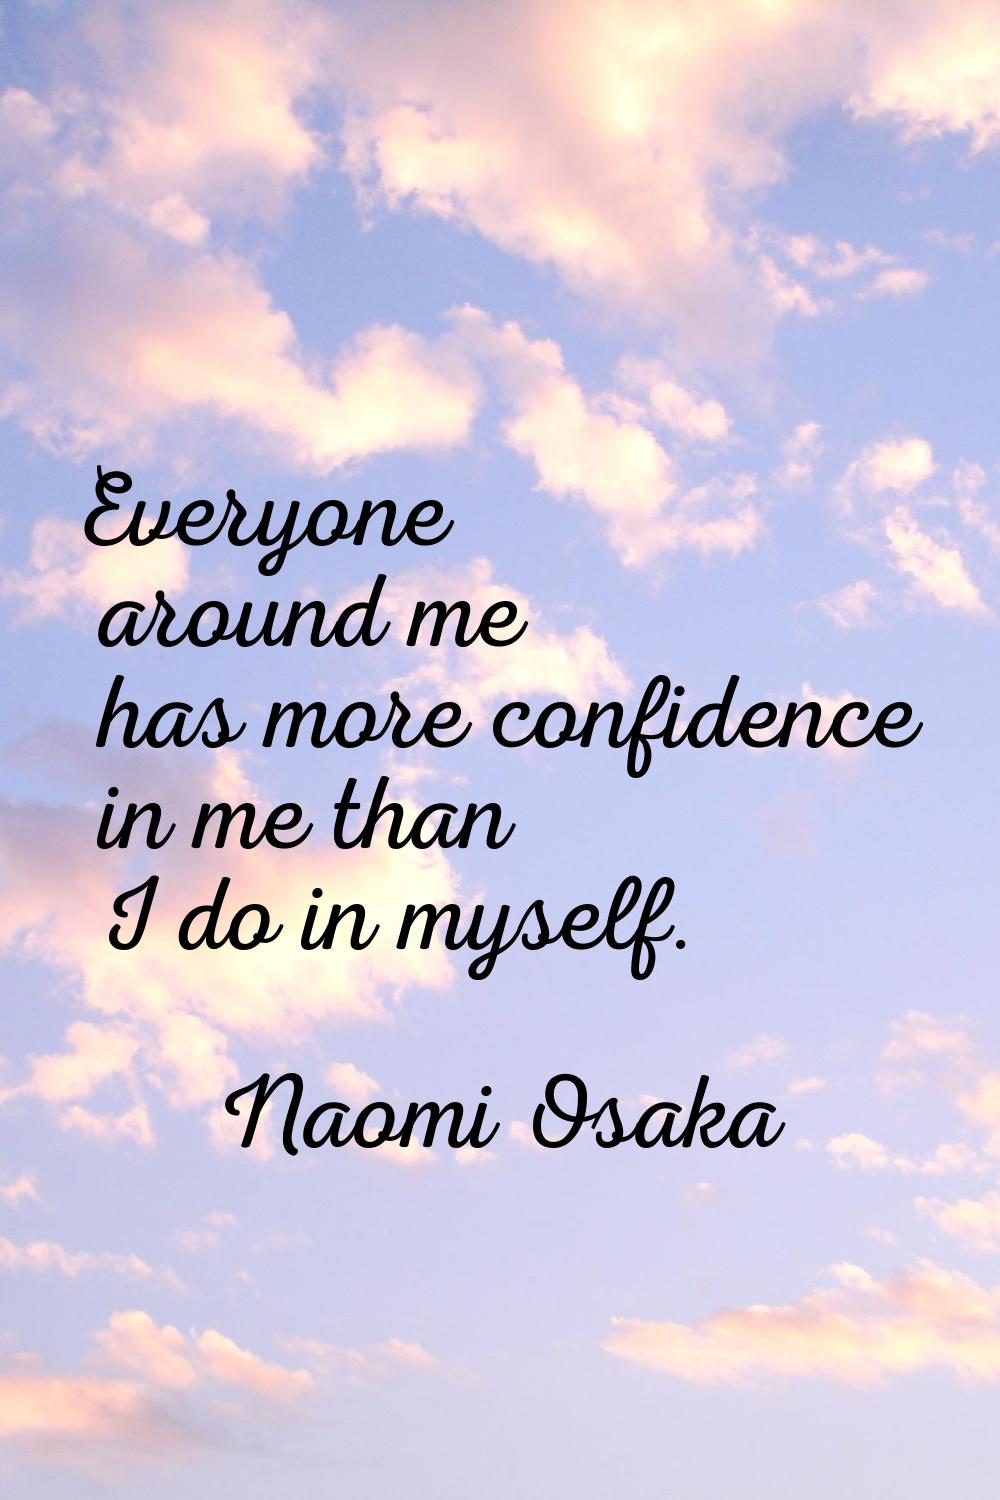 Everyone around me has more confidence in me than I do in myself.